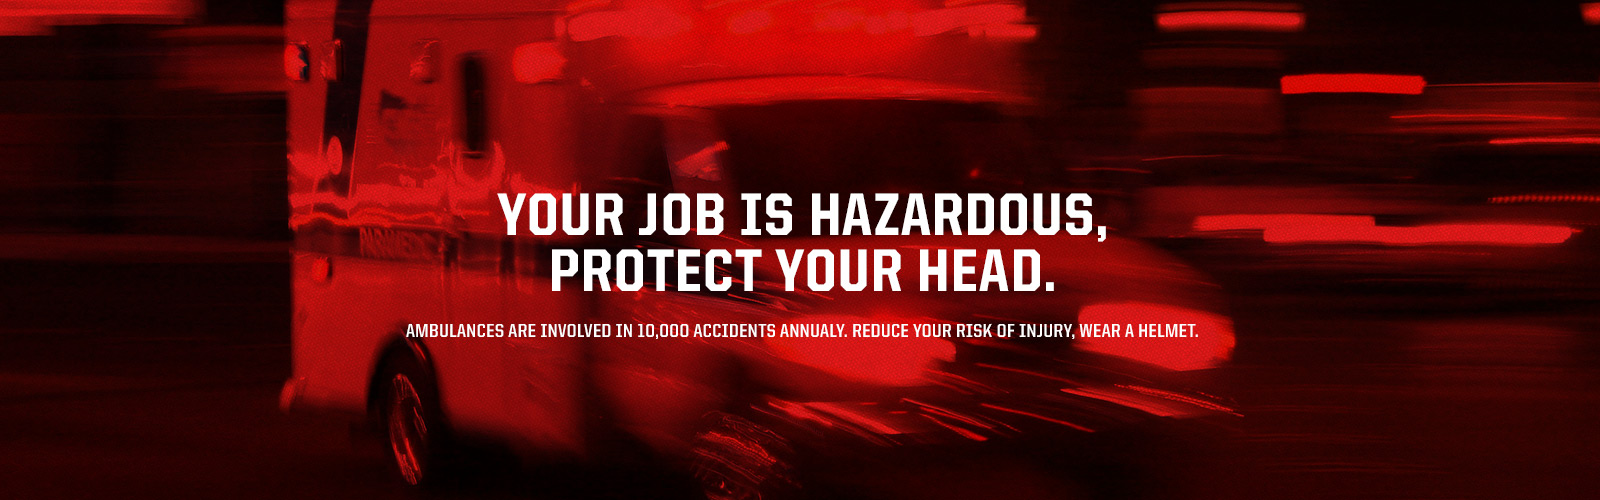 Ambulances Are Involved in 10,000 Accidents Annually. Reduce Your Risk of Injury, Wear a Helmet.